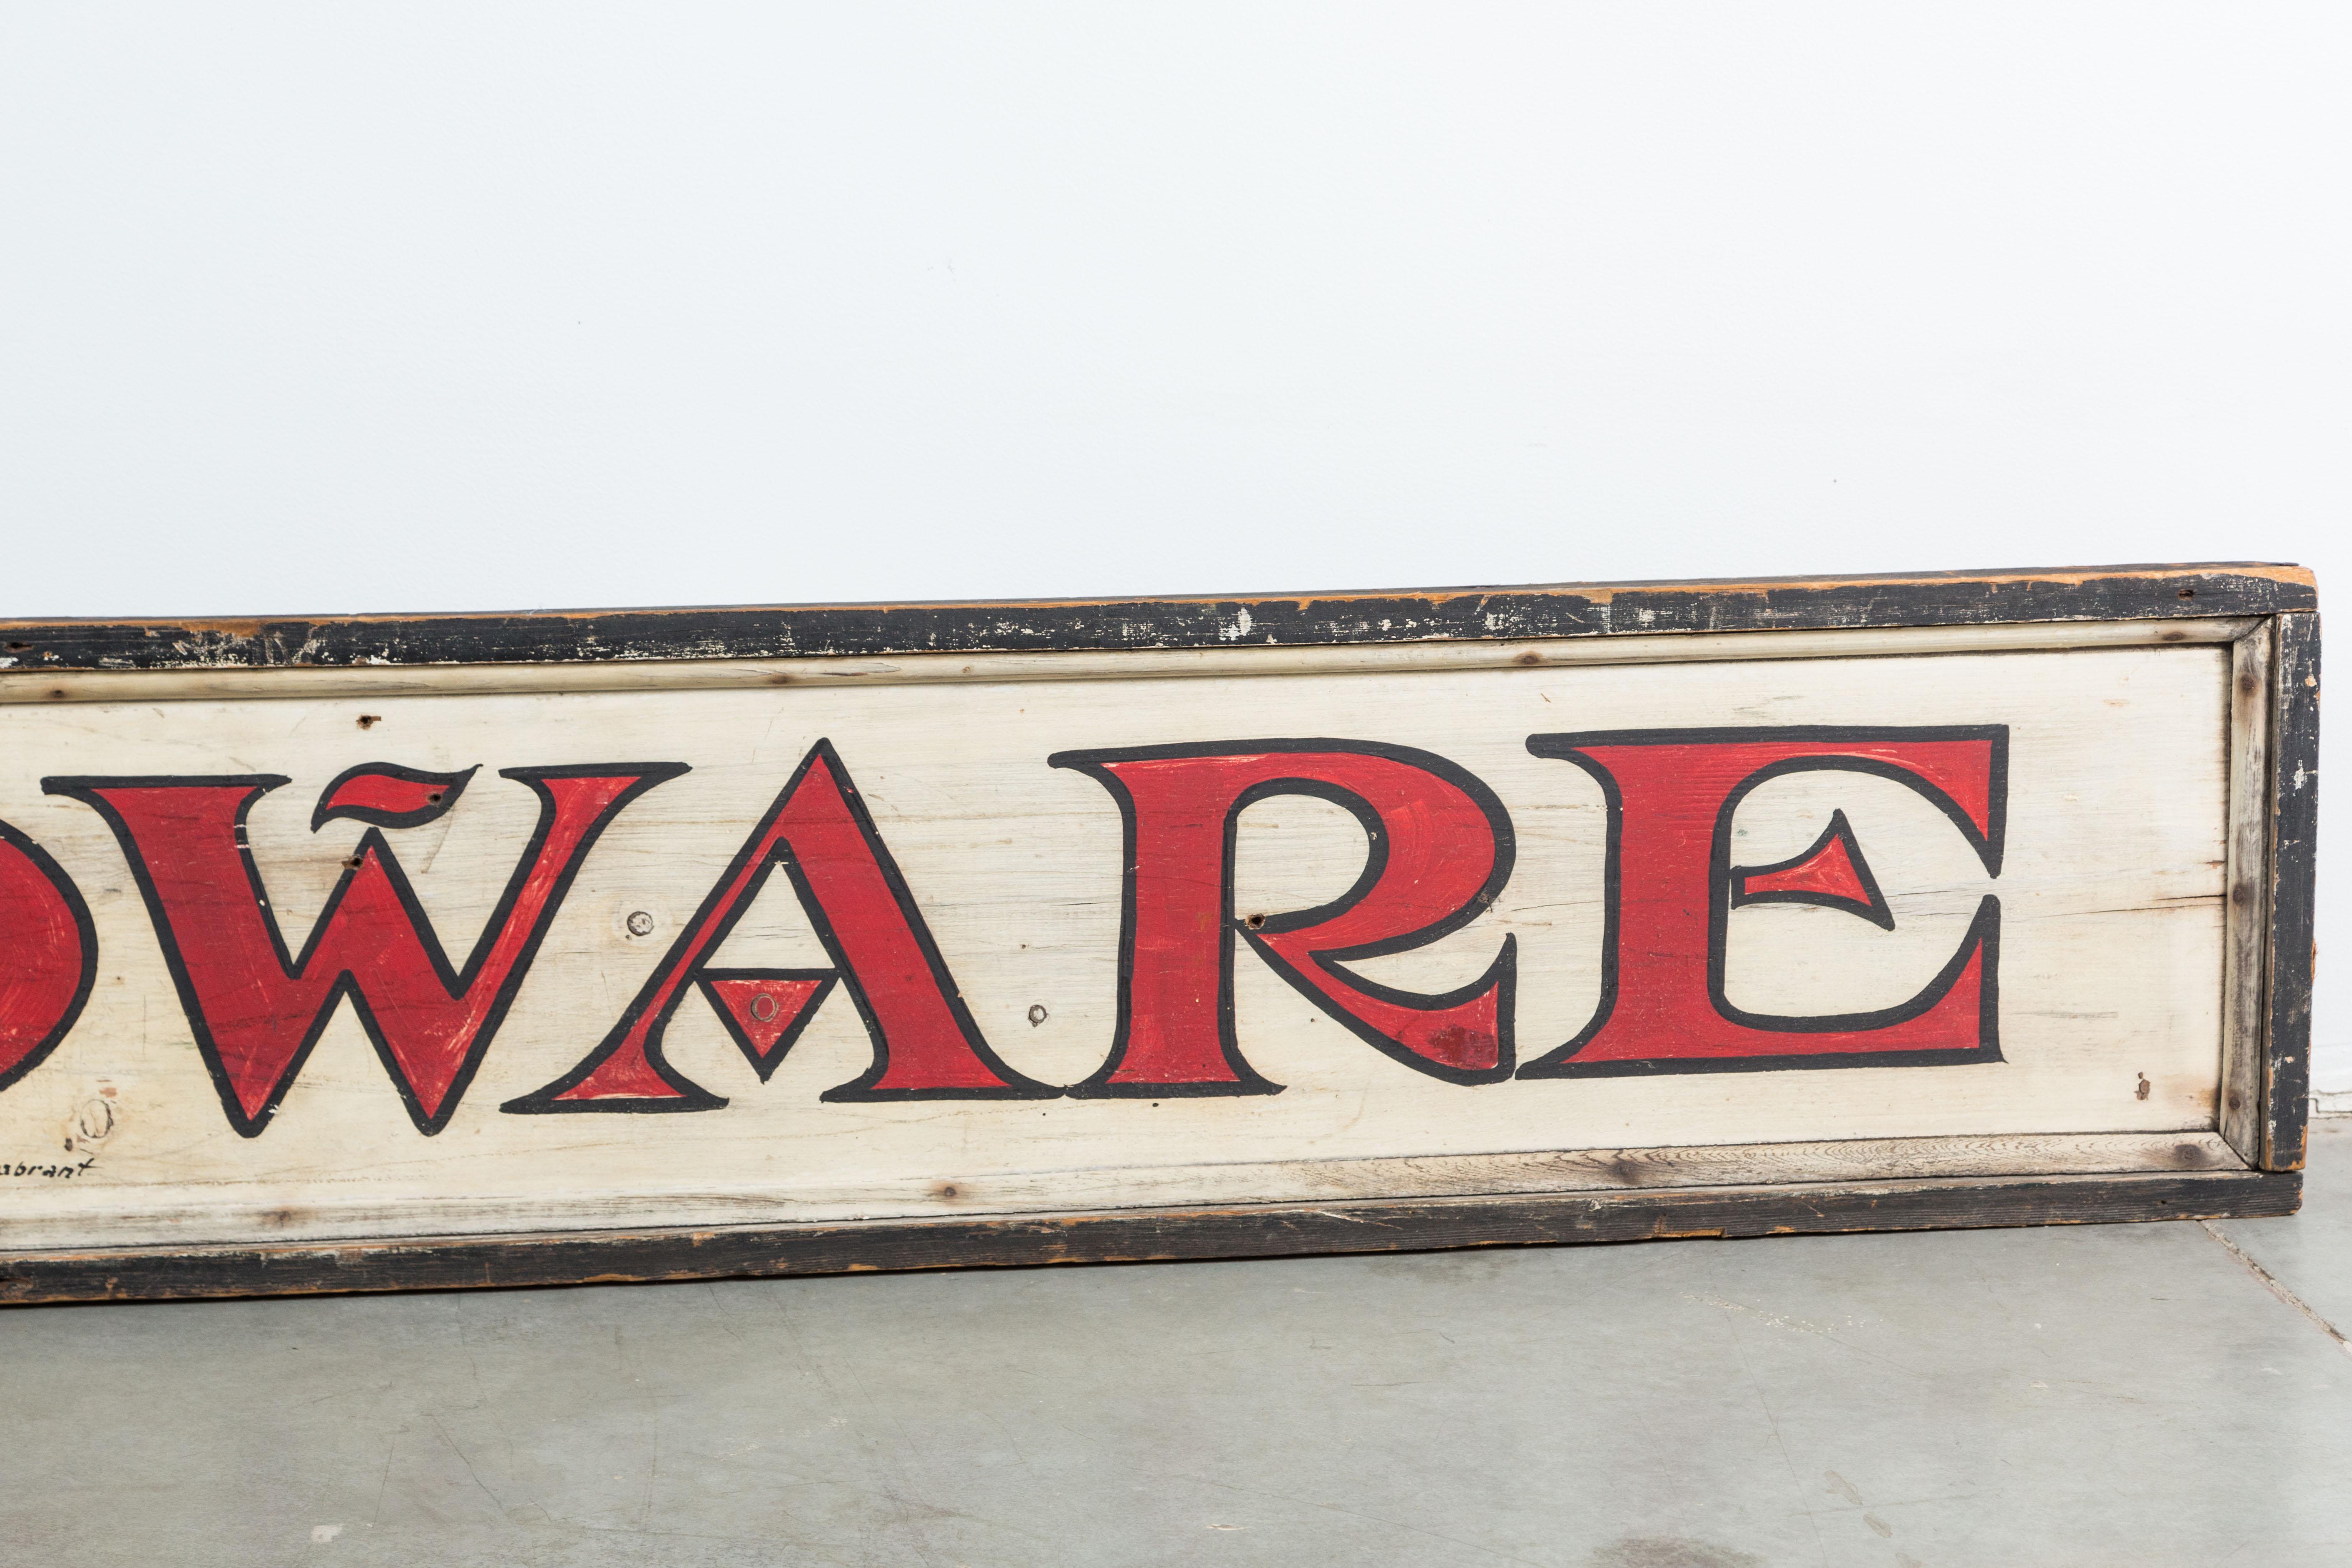 General store HARDWARE department sign. Made and signed by professional sign maker. Excellent red and black hand lettering. Simple and graphic, circa 1900.